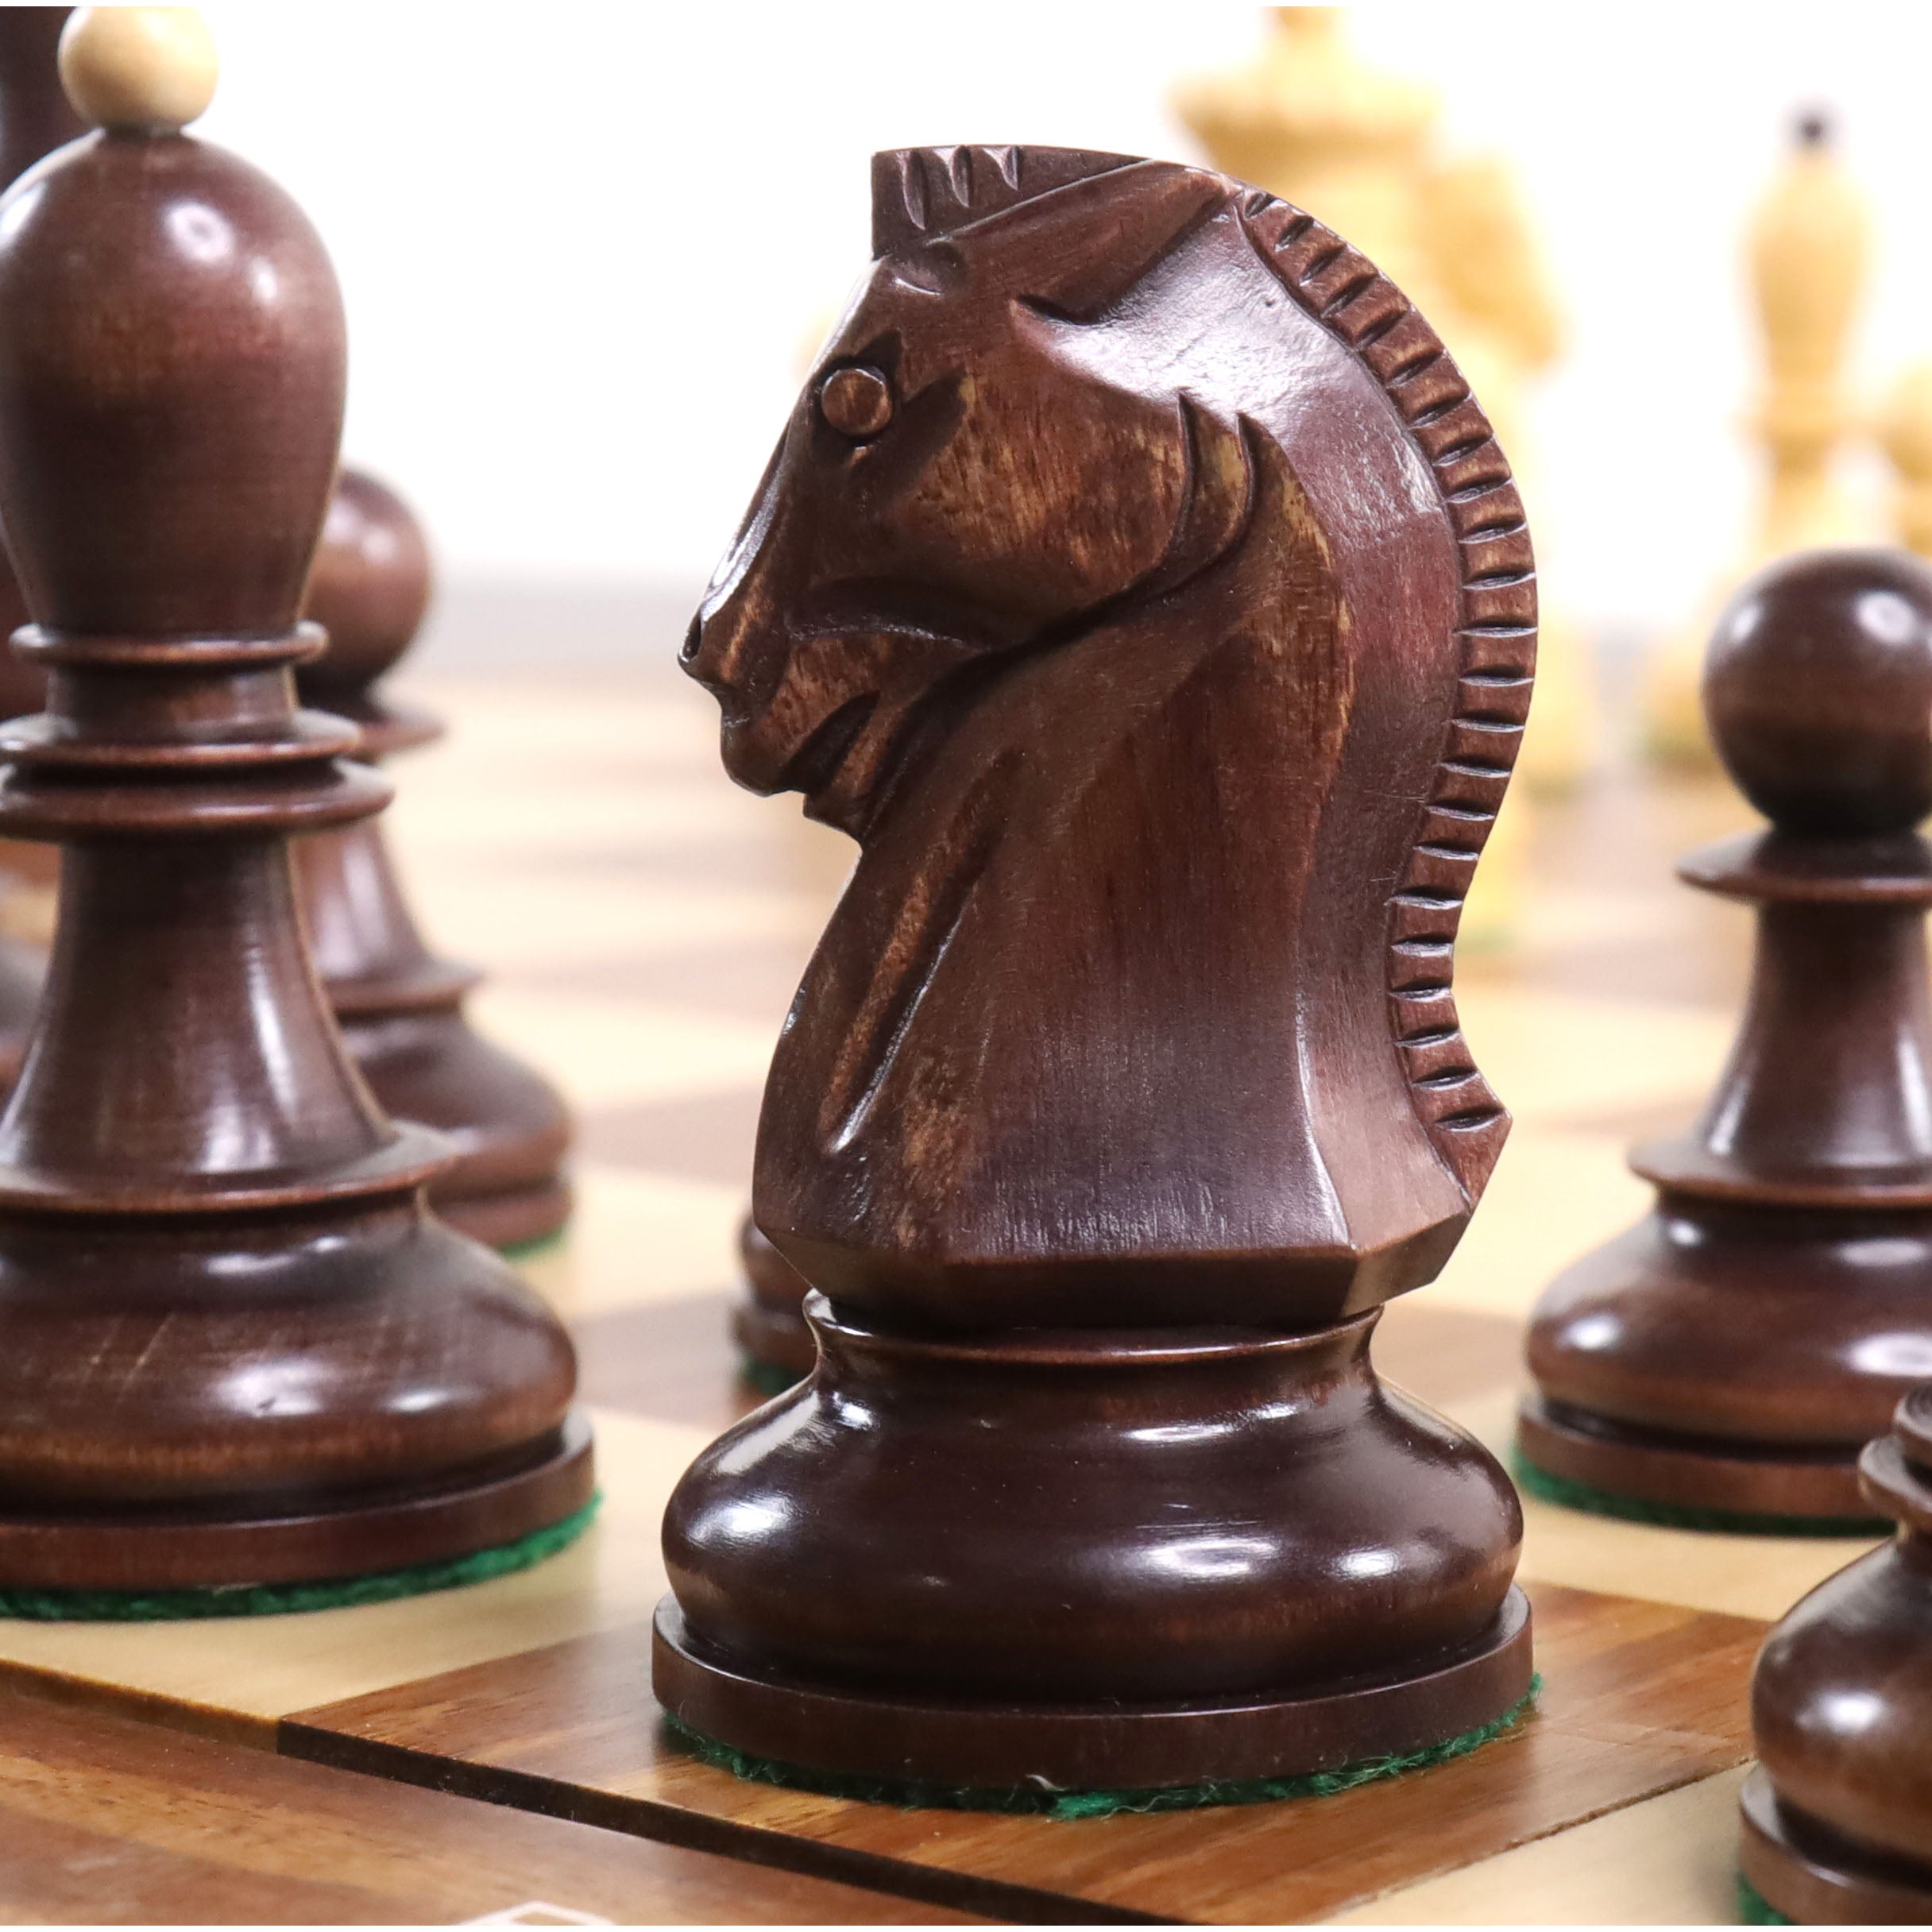 Discover The 5 Most Expensive Chess Sets in the World – royalchessmall